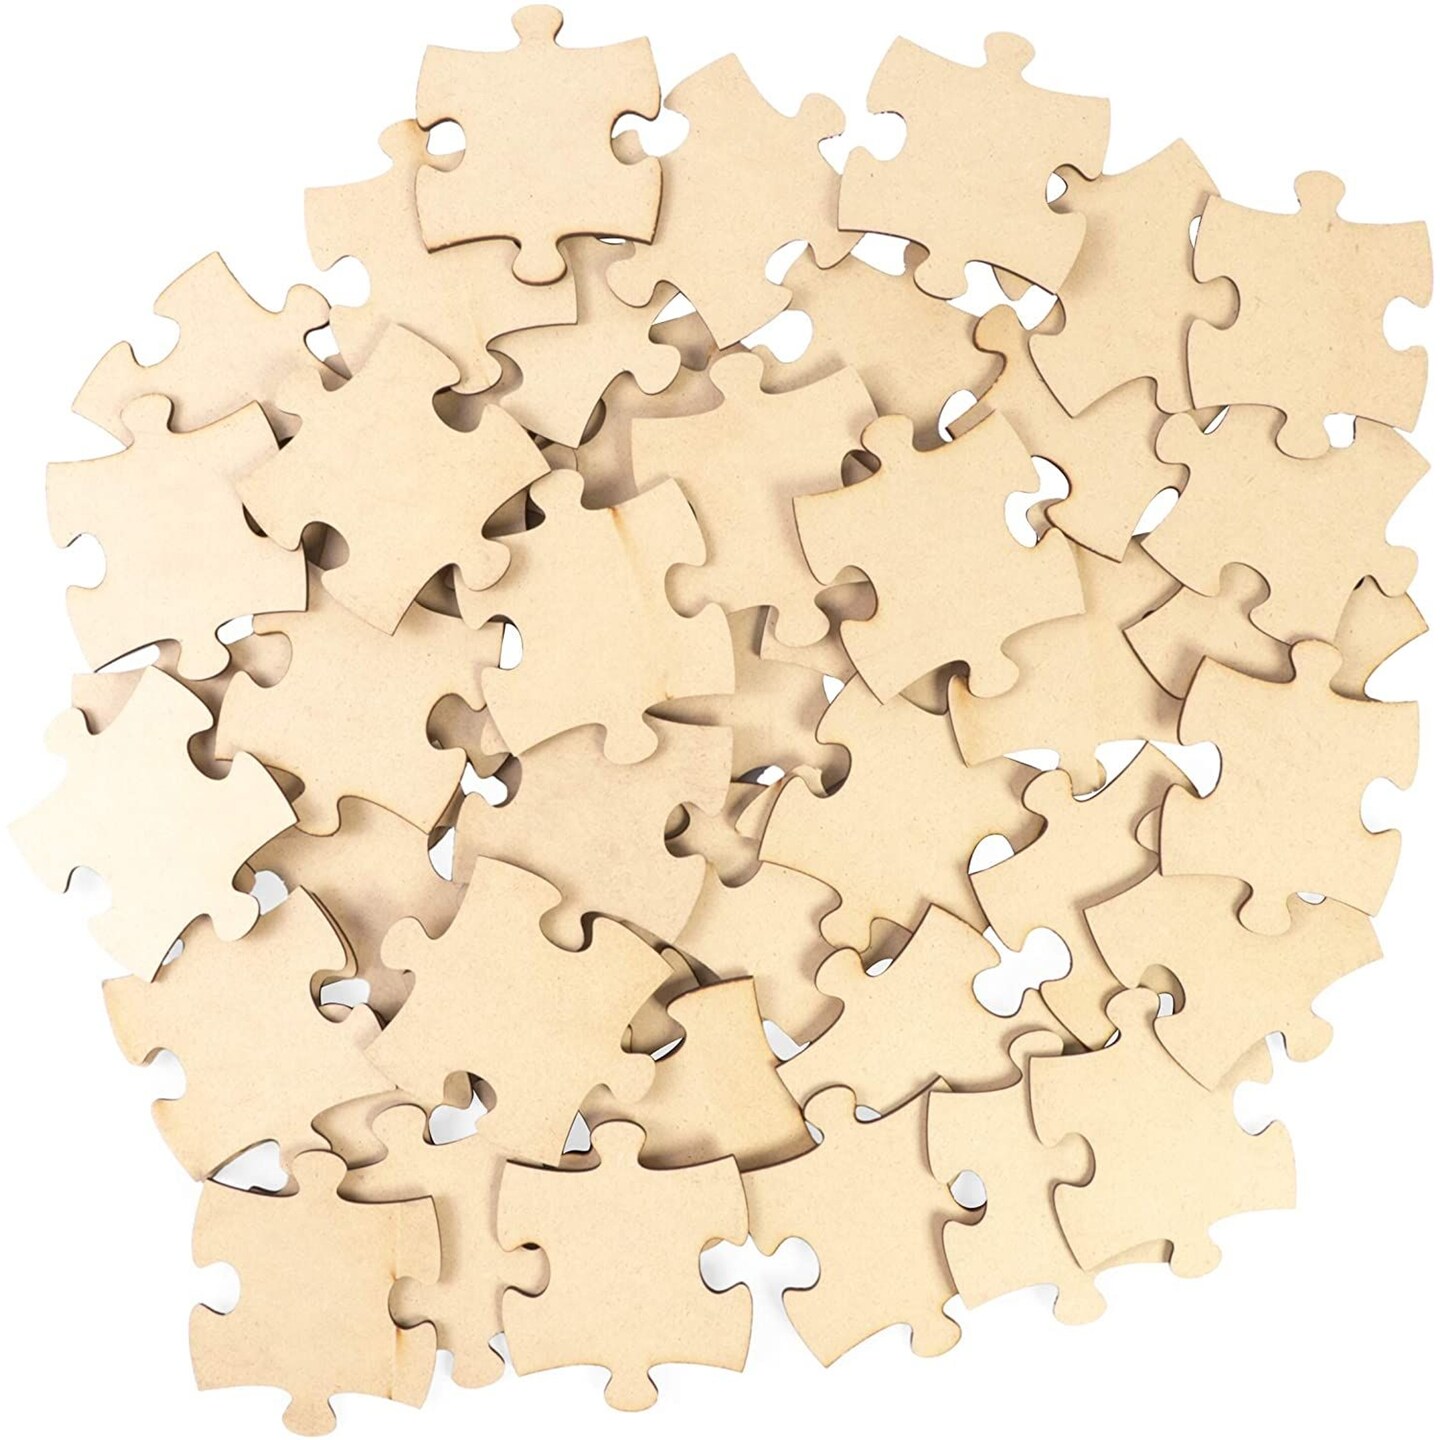 50 Piece Blank Wooden Puzzle Jumbo Size, Each Piece is 4x3.2 Inches to Draw  on, Unfinished Freeform Large Jigsaw Puzzle Pieces for Arts & Crafts